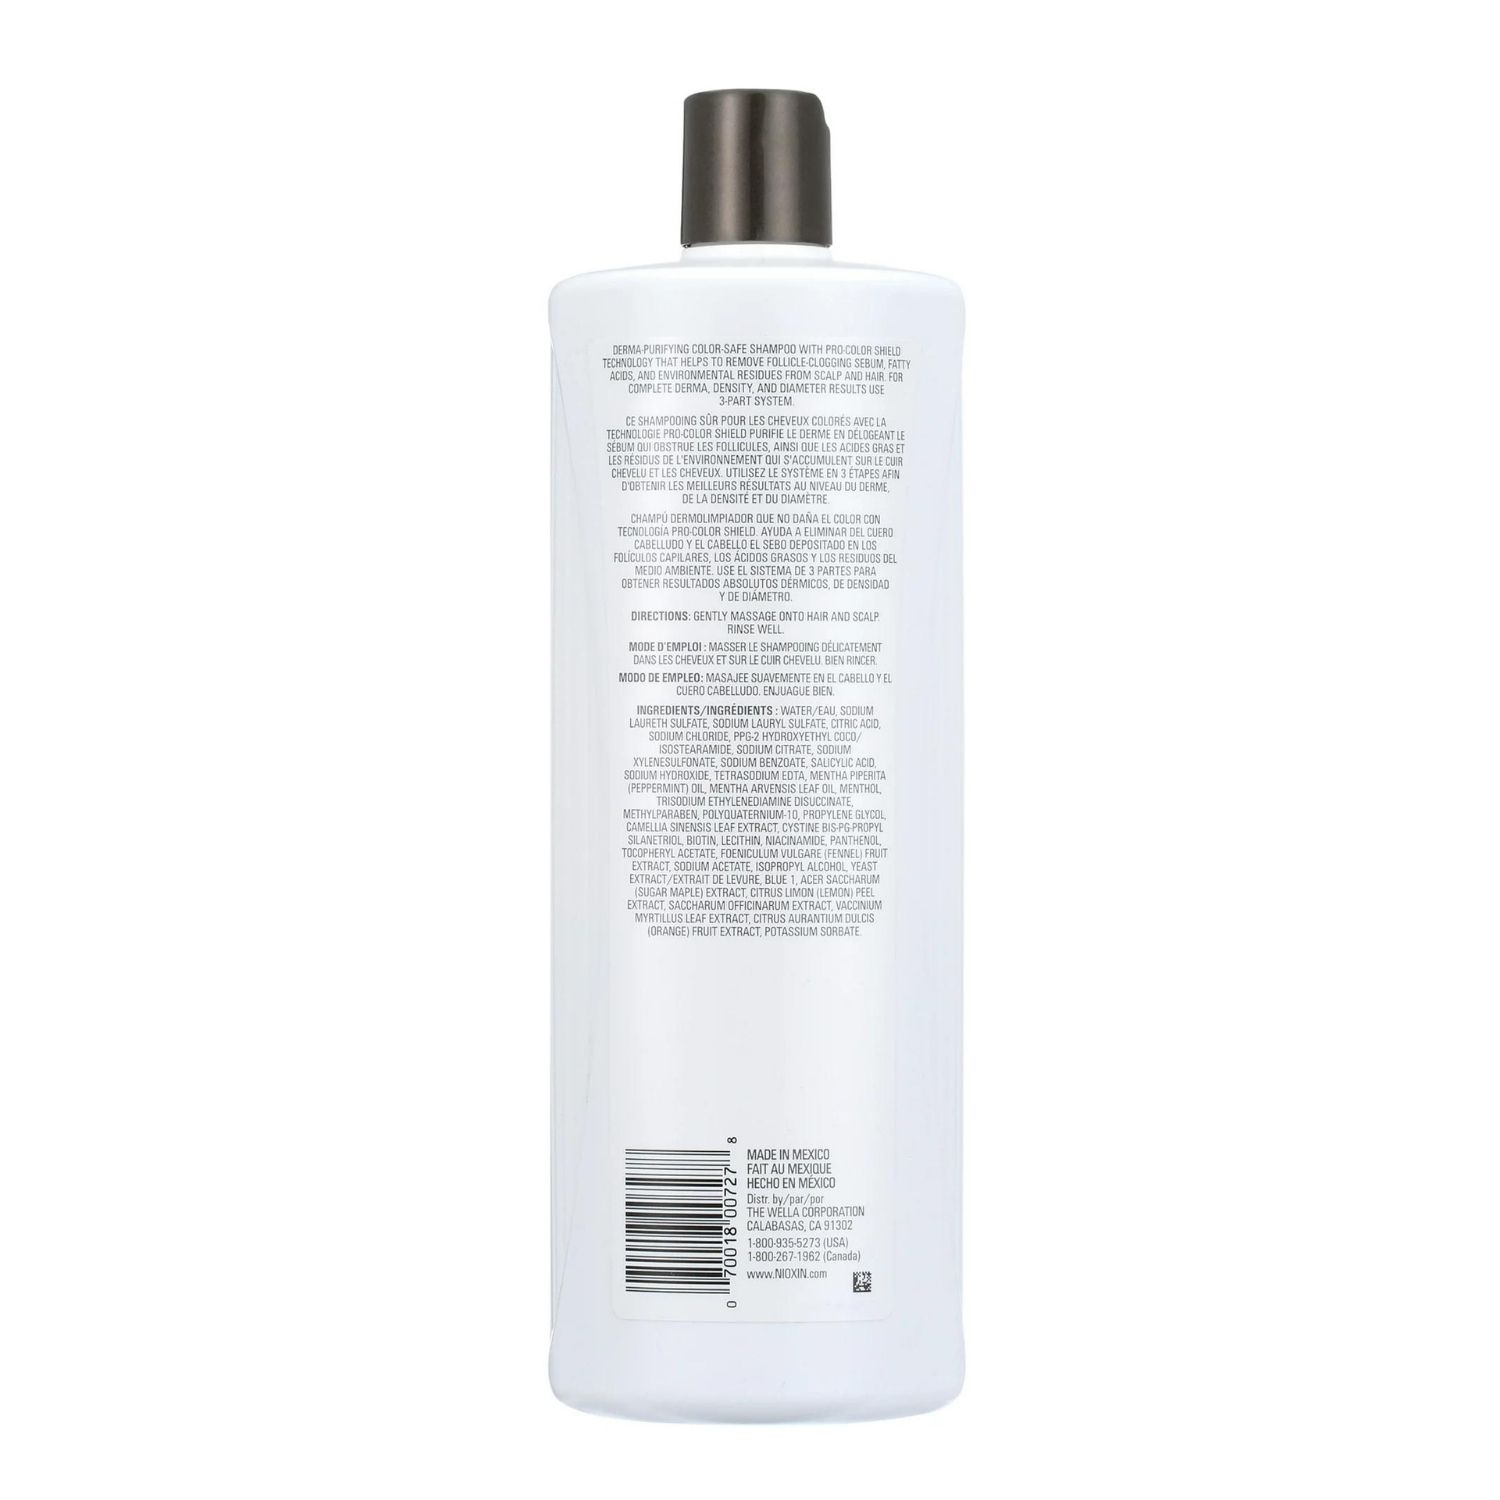 Nioxin System 3 Cleanser Shampoo, for Light Thinning Colored Hair, 33.8 oz - image 3 of 6